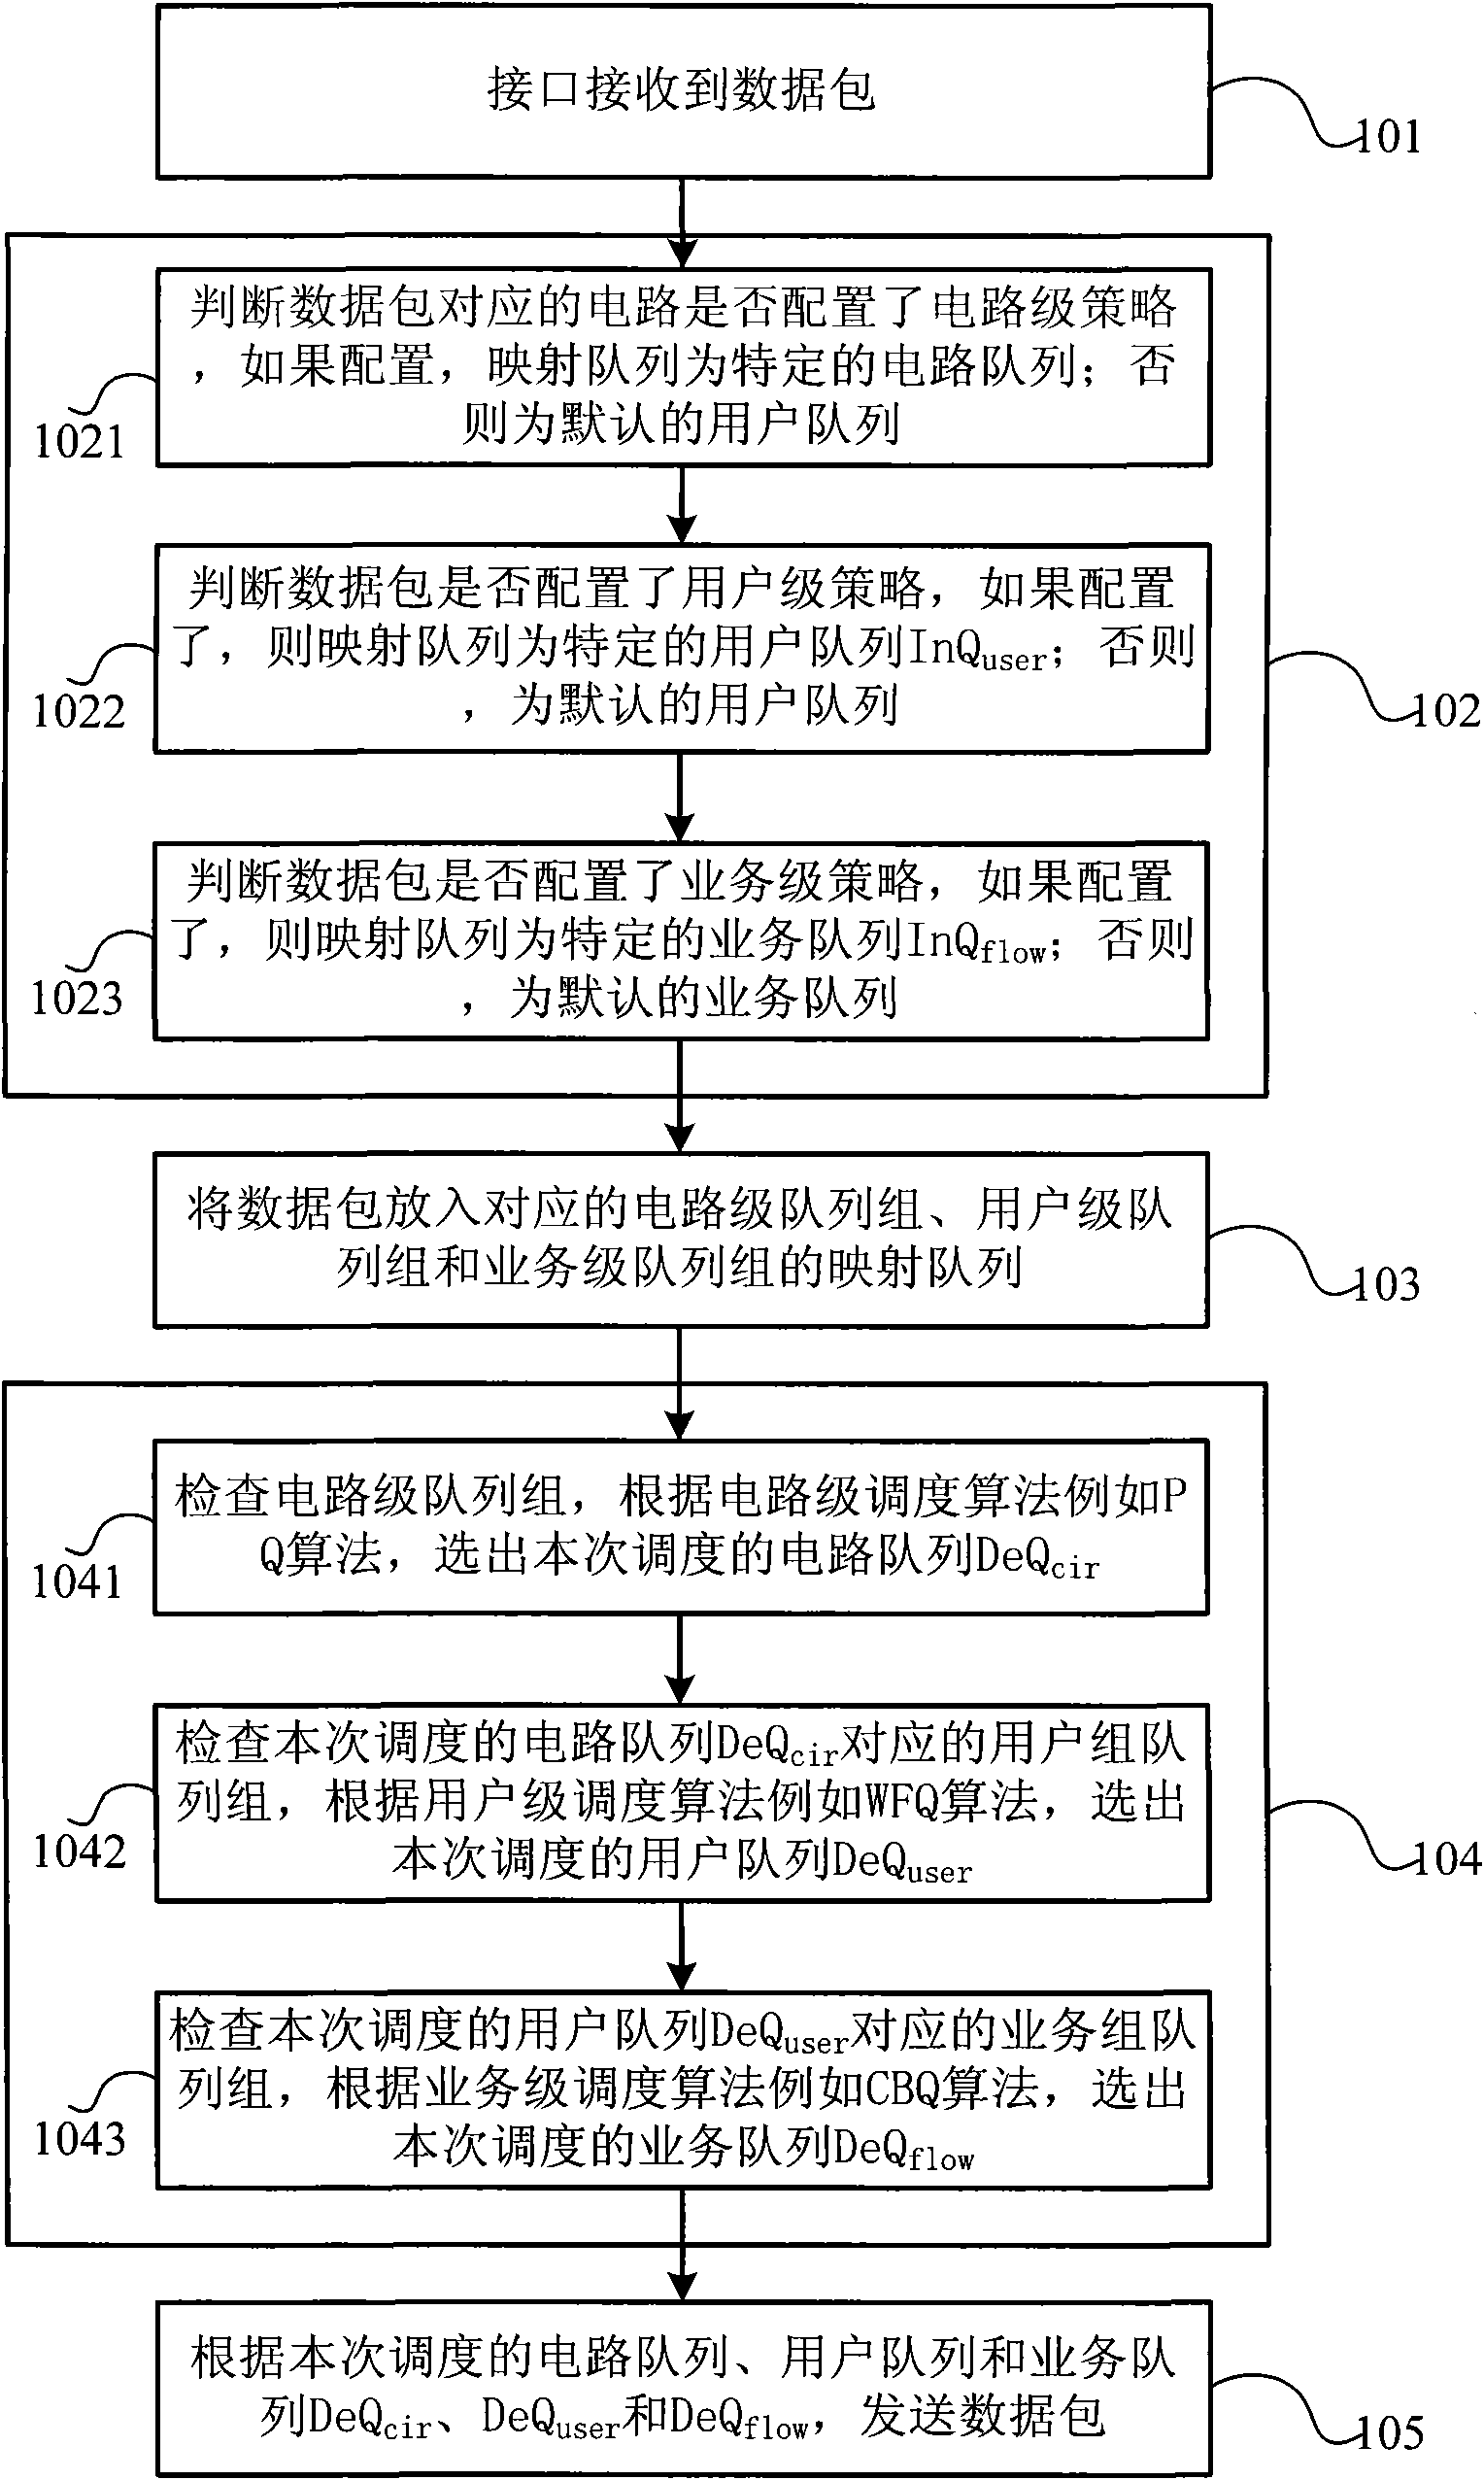 Multi-queue based scheduling method and system